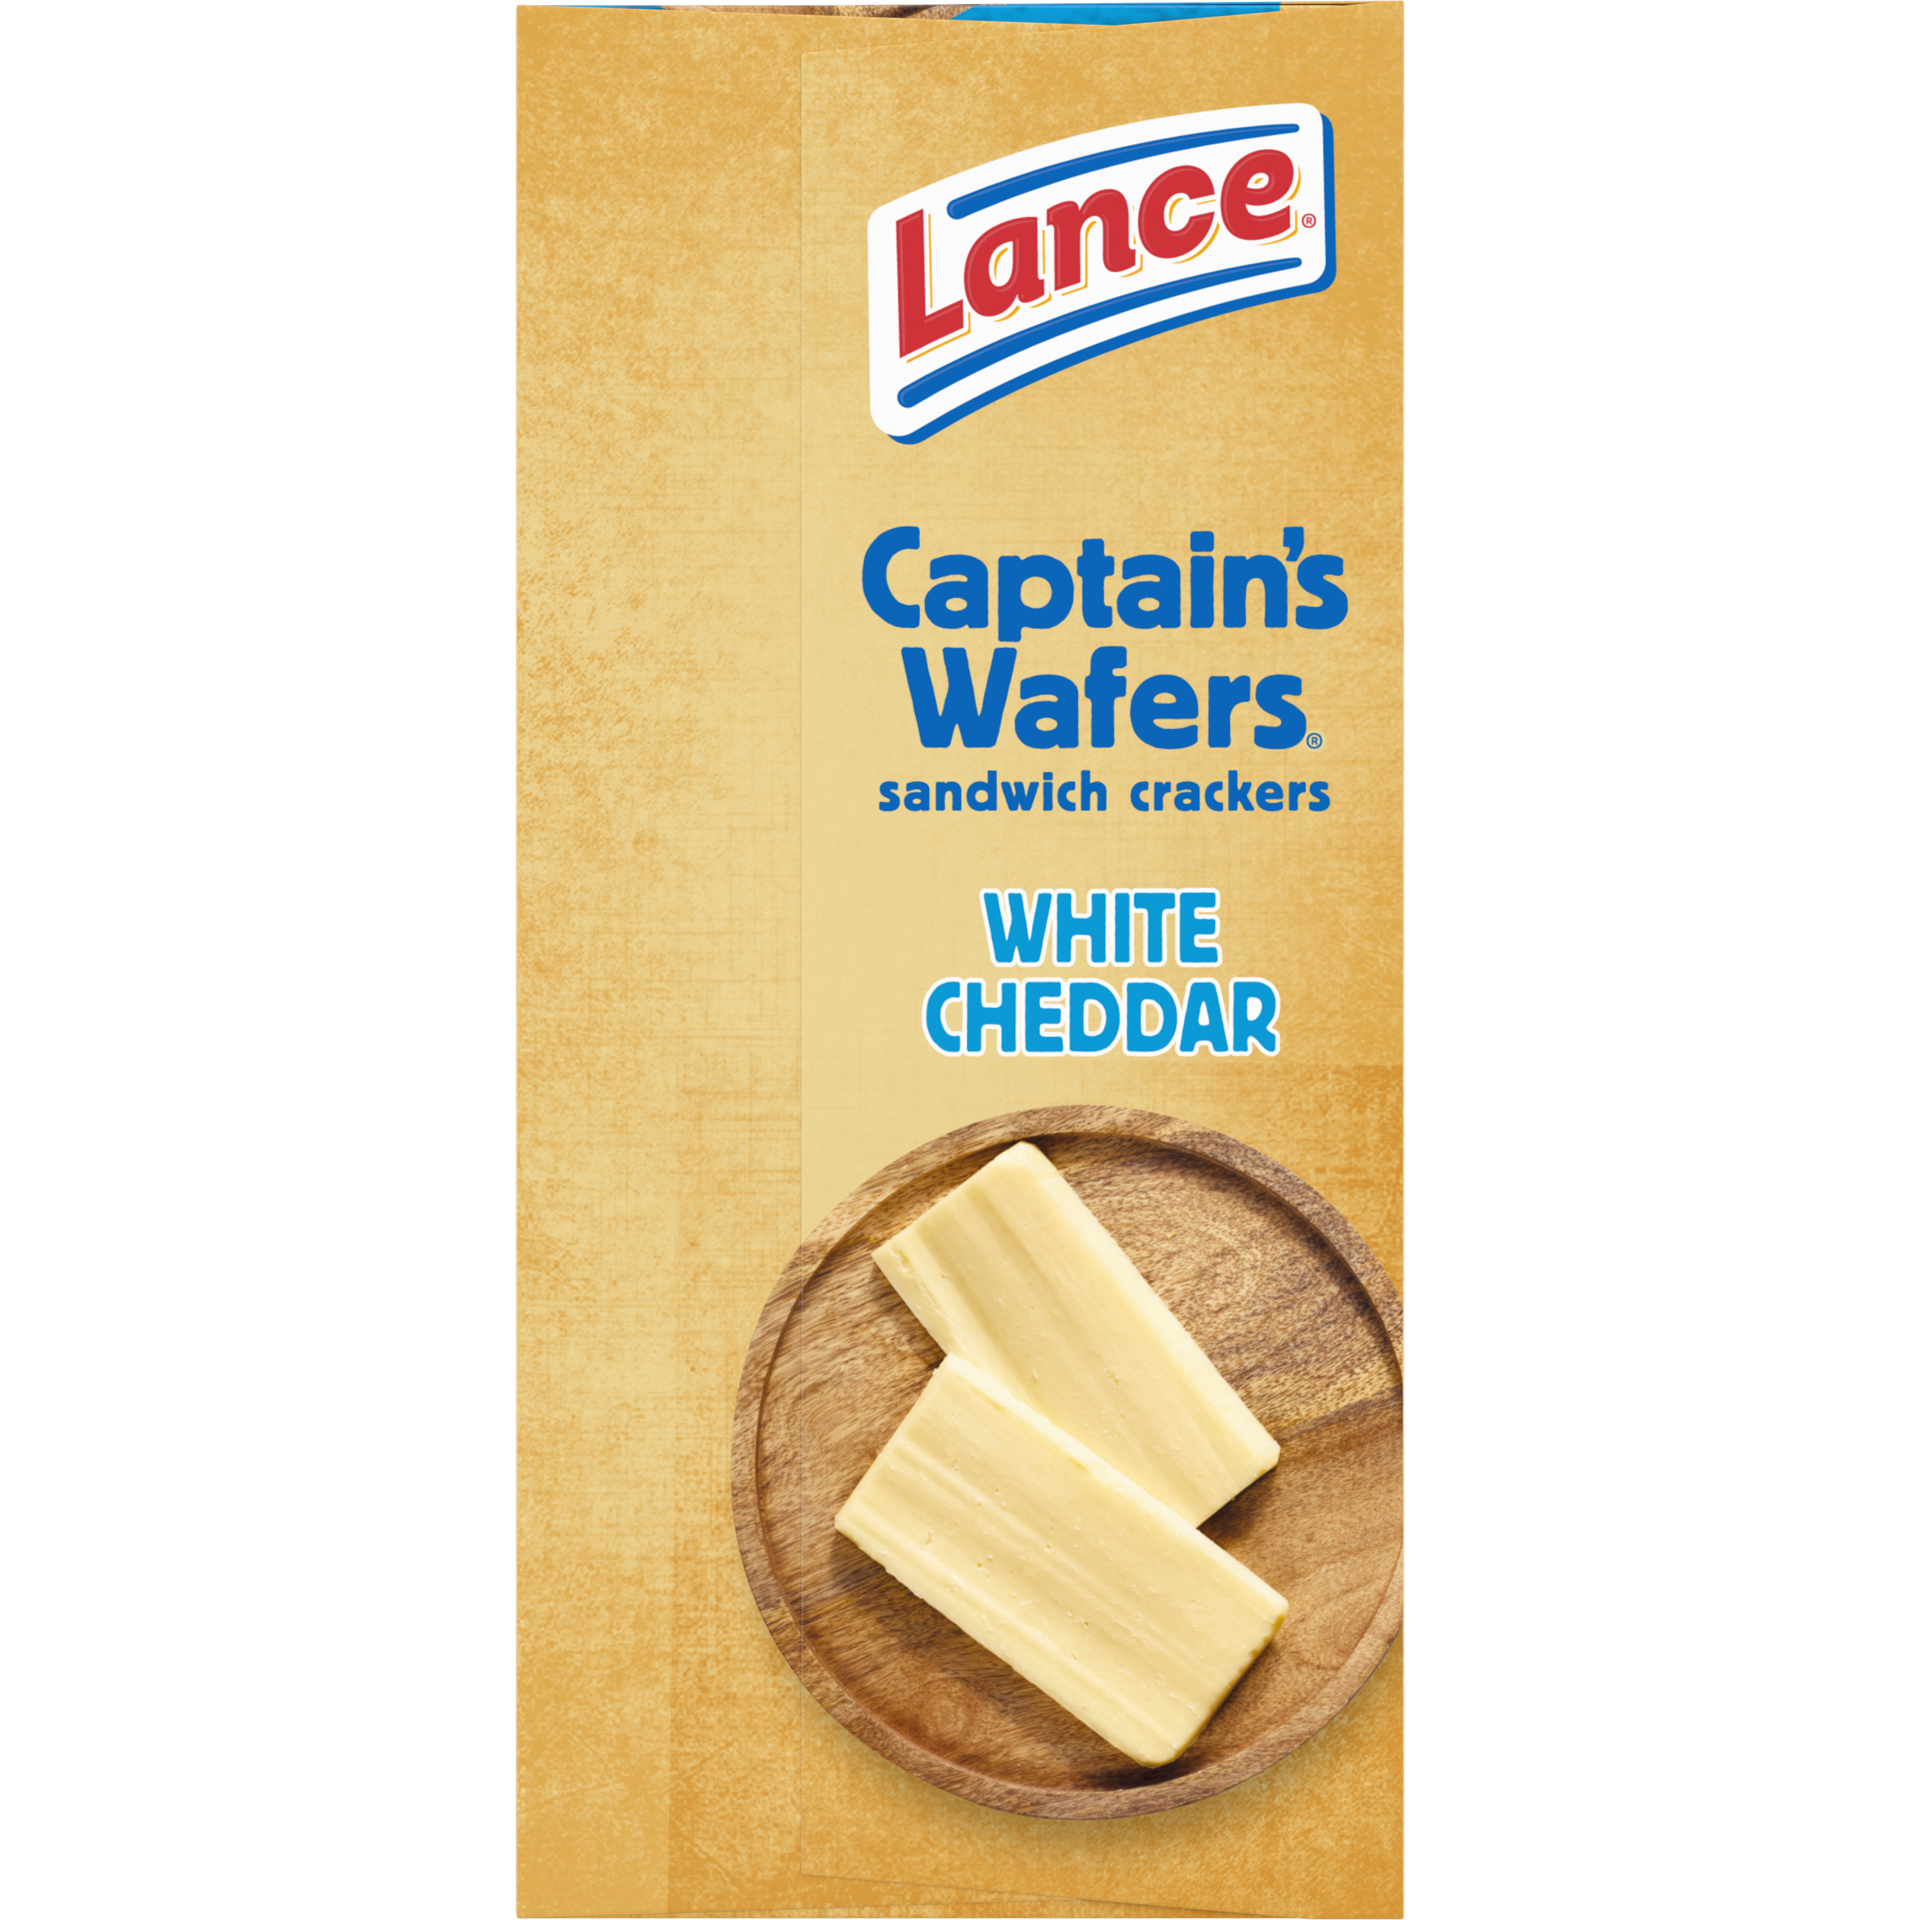 slide 3 of 5, Lance Sandwich Crackers, Captain's Wafers White Cheddar, 6 Packs, 4 Sandwiches Each, 5.5 oz